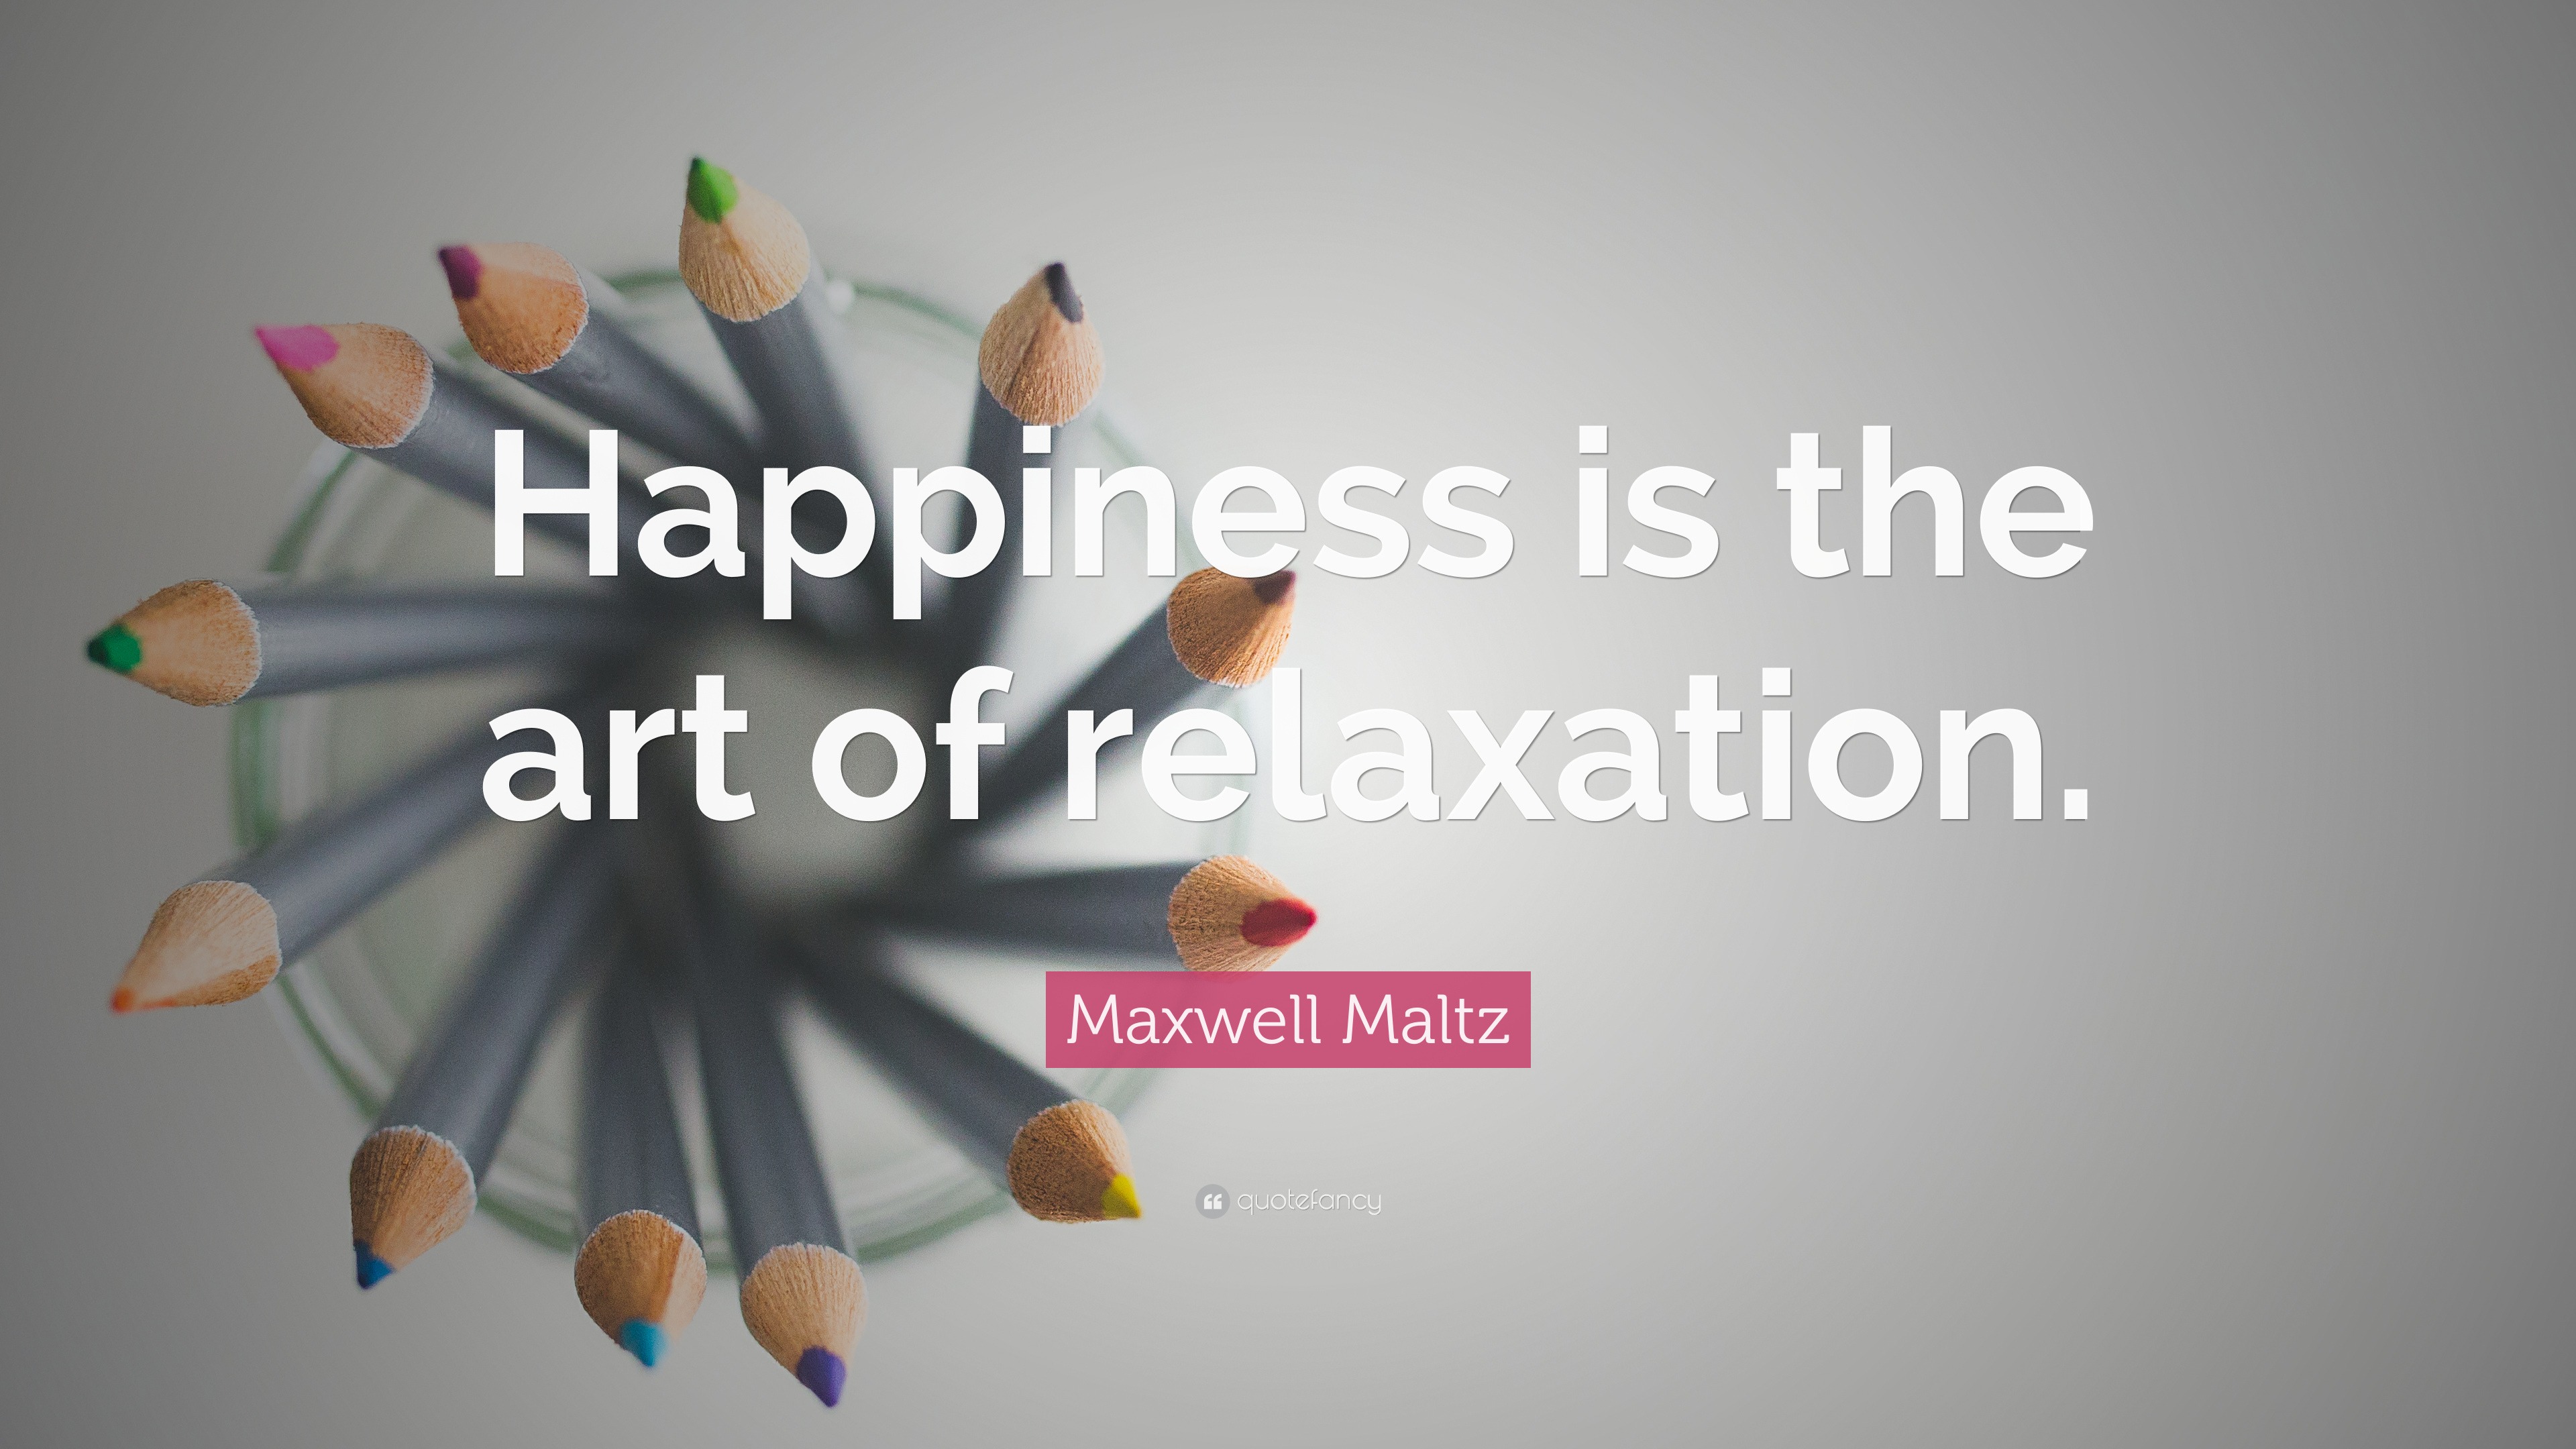 Maxwell Maltz Quote: “Happiness is the art of relaxation.”